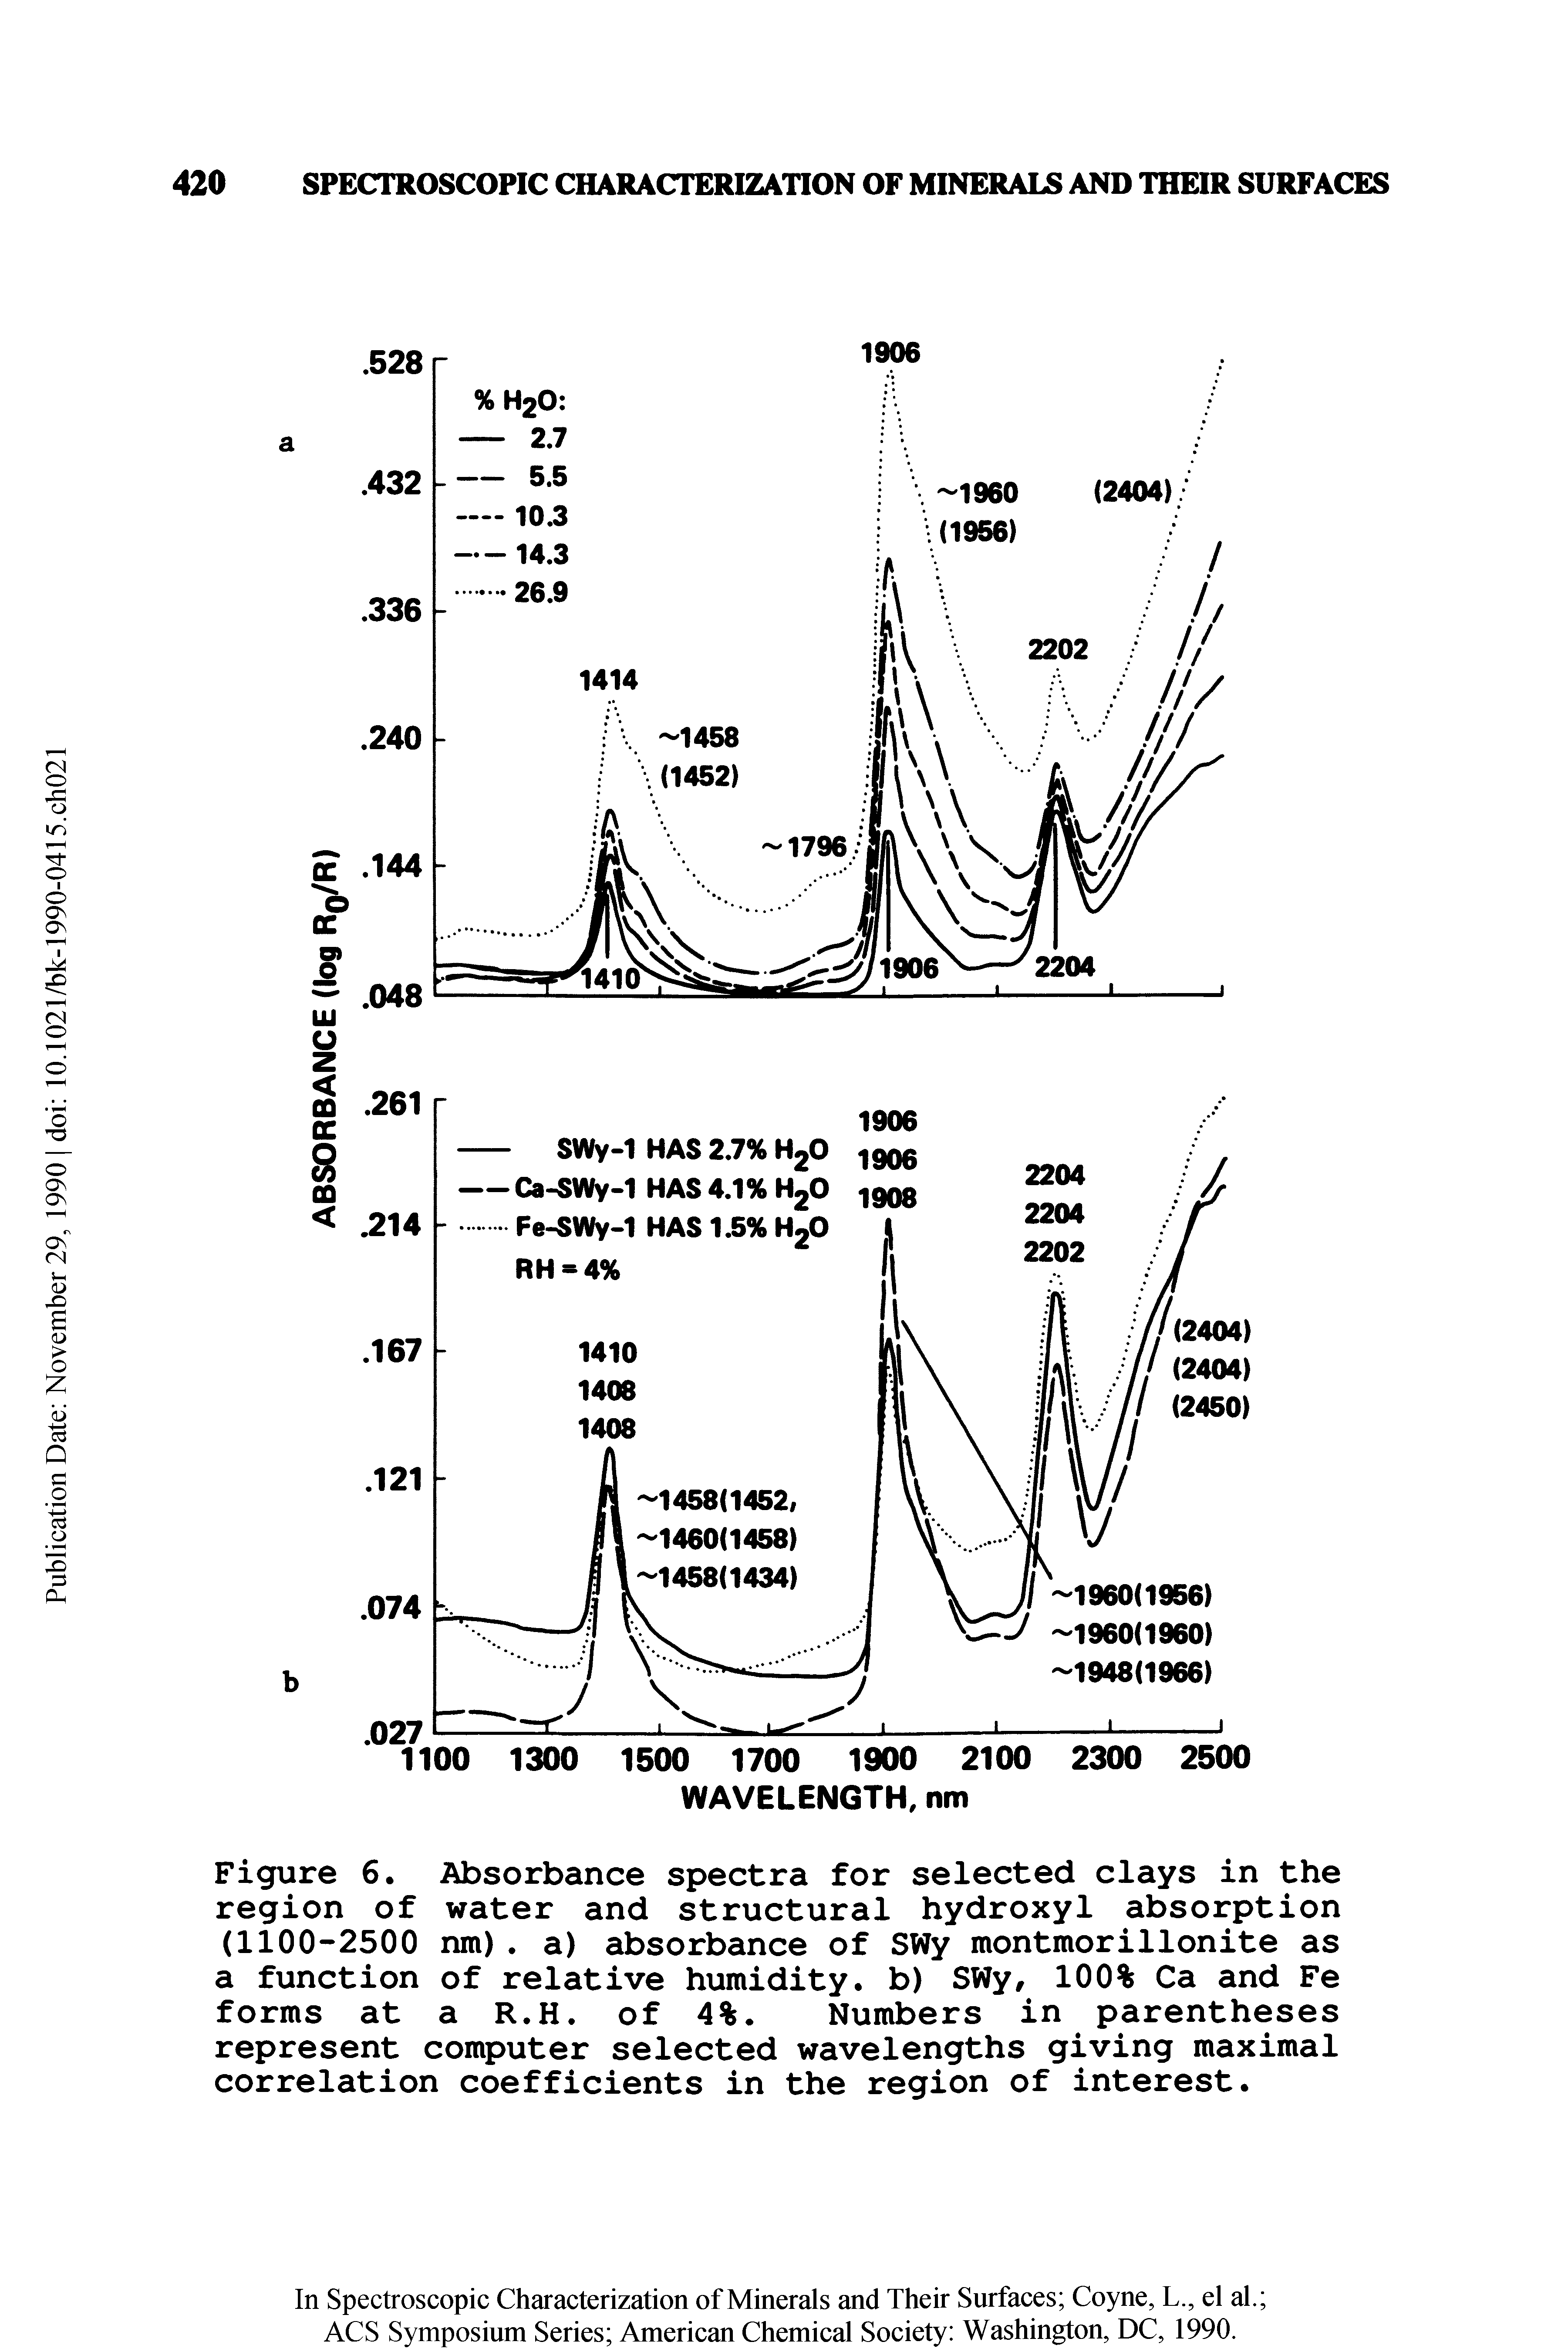 Figure 6. Absorbance spectra for selected clays in the region of water and structural hydroxyl absorption (1100-2500 nm). a) absorbance of SWy montmorillonite as a function of relative humidity, b) SWy, 100% Ca and Fe forms at a R.H. of 4%. Numbers in parentheses represent computer selected wavelengths giving maximal correlation coefficients in the region of interest.